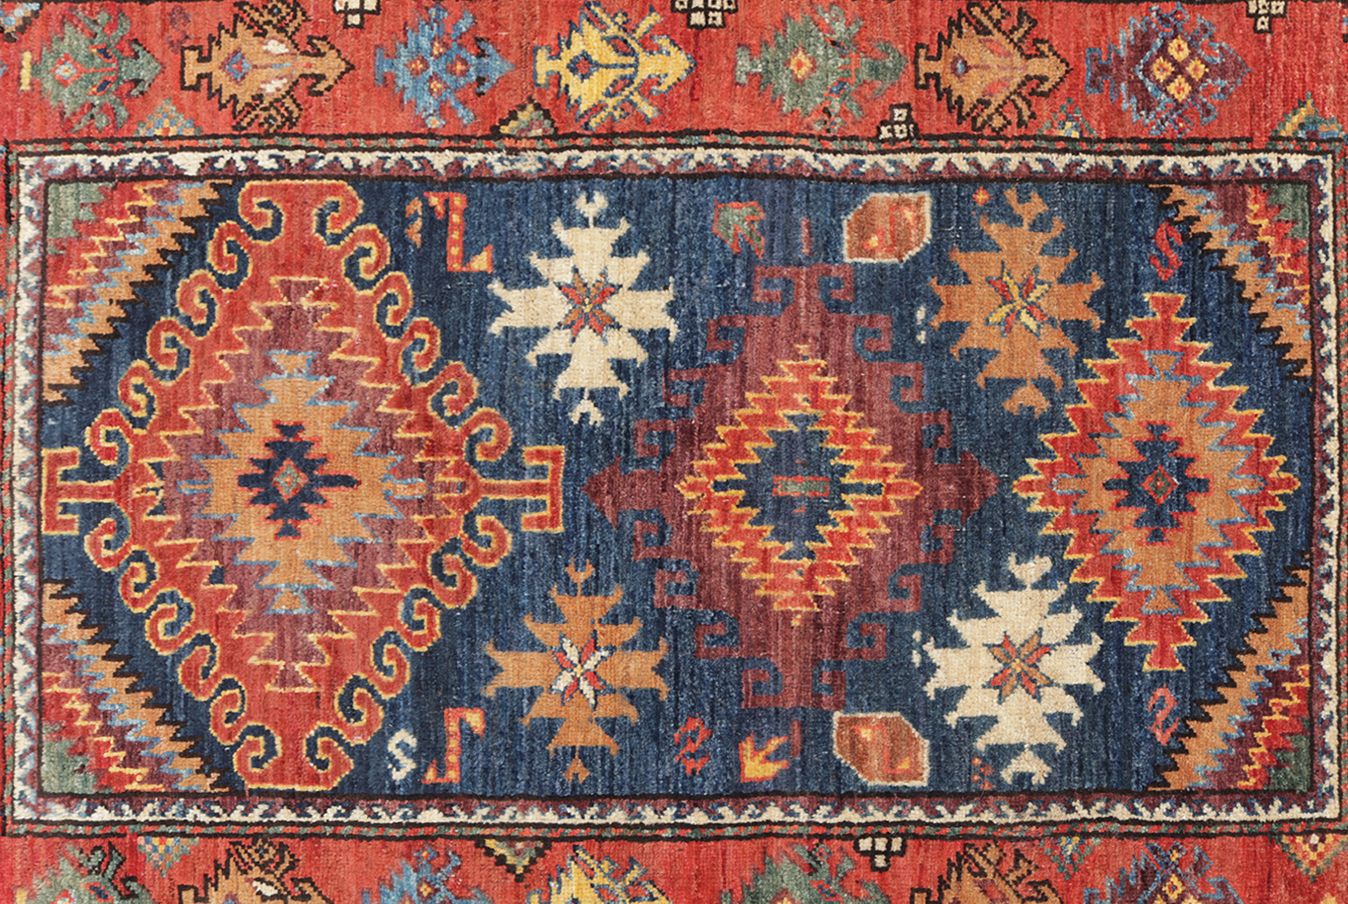 A Guide To Traditional Hand Knotted Rugs | Blog With Regard To Hand Knotted Rugs (View 10 of 15)